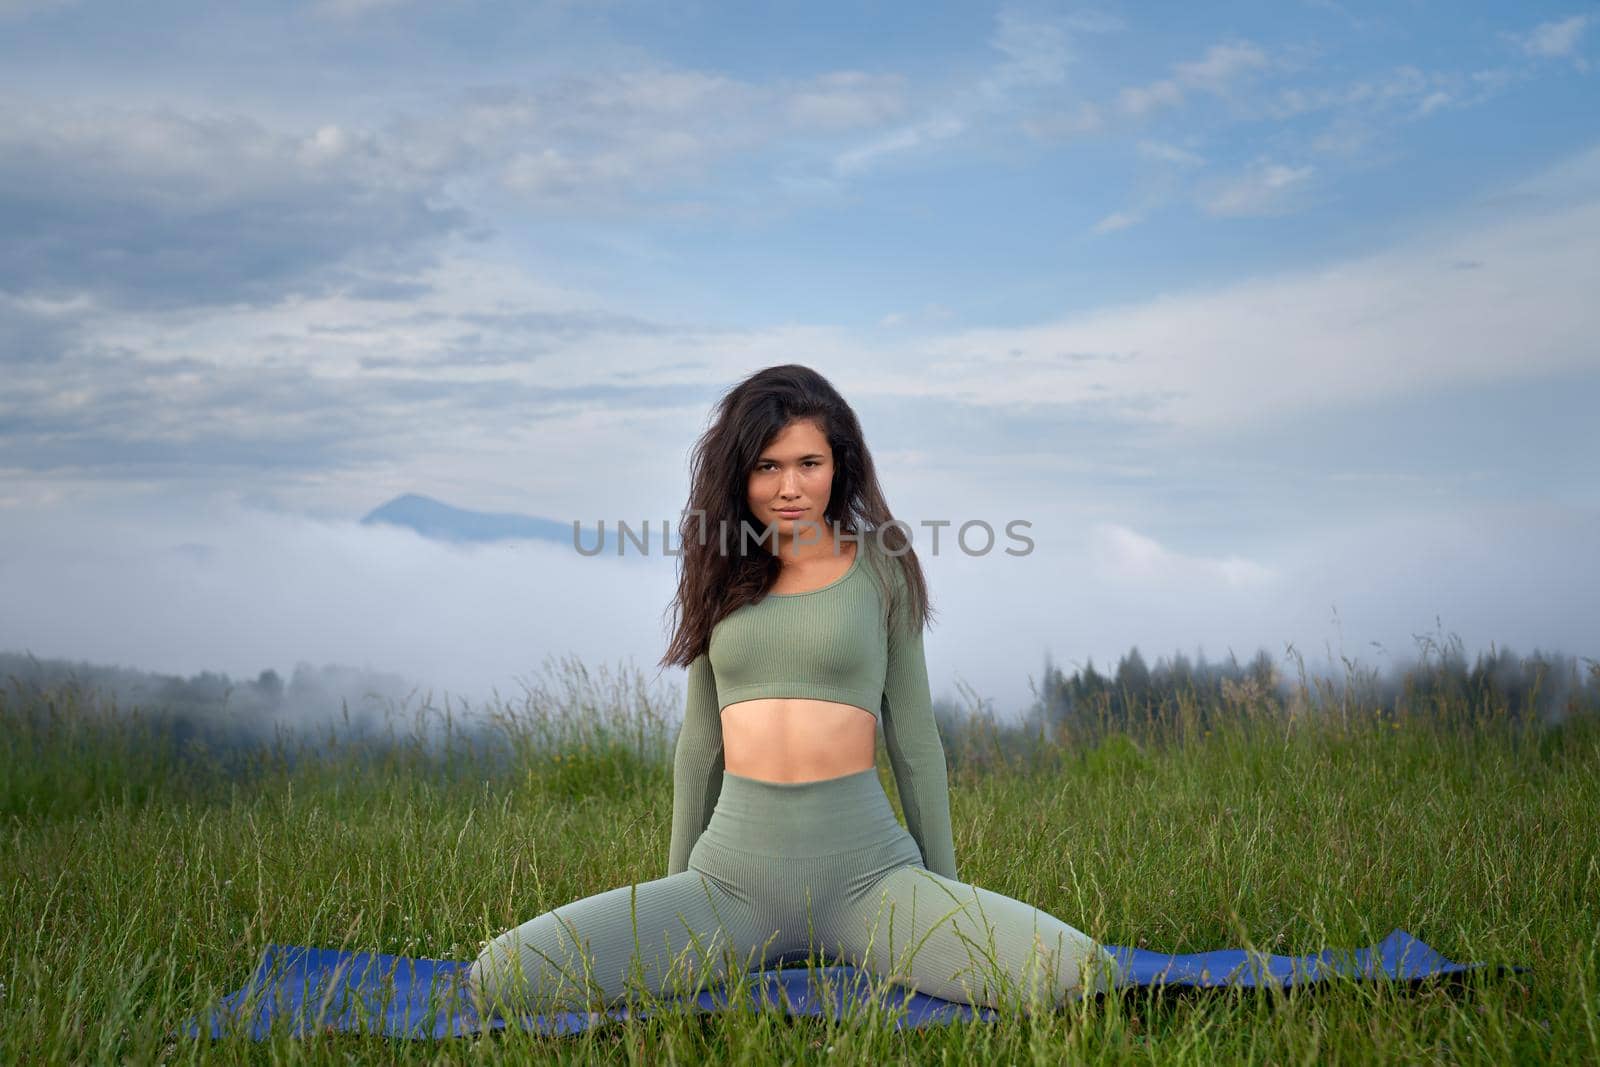 Beautiful young woman with dark hair stretching on yoga mat with mountains on background. Active female person enjoying outdoors activity during free time.